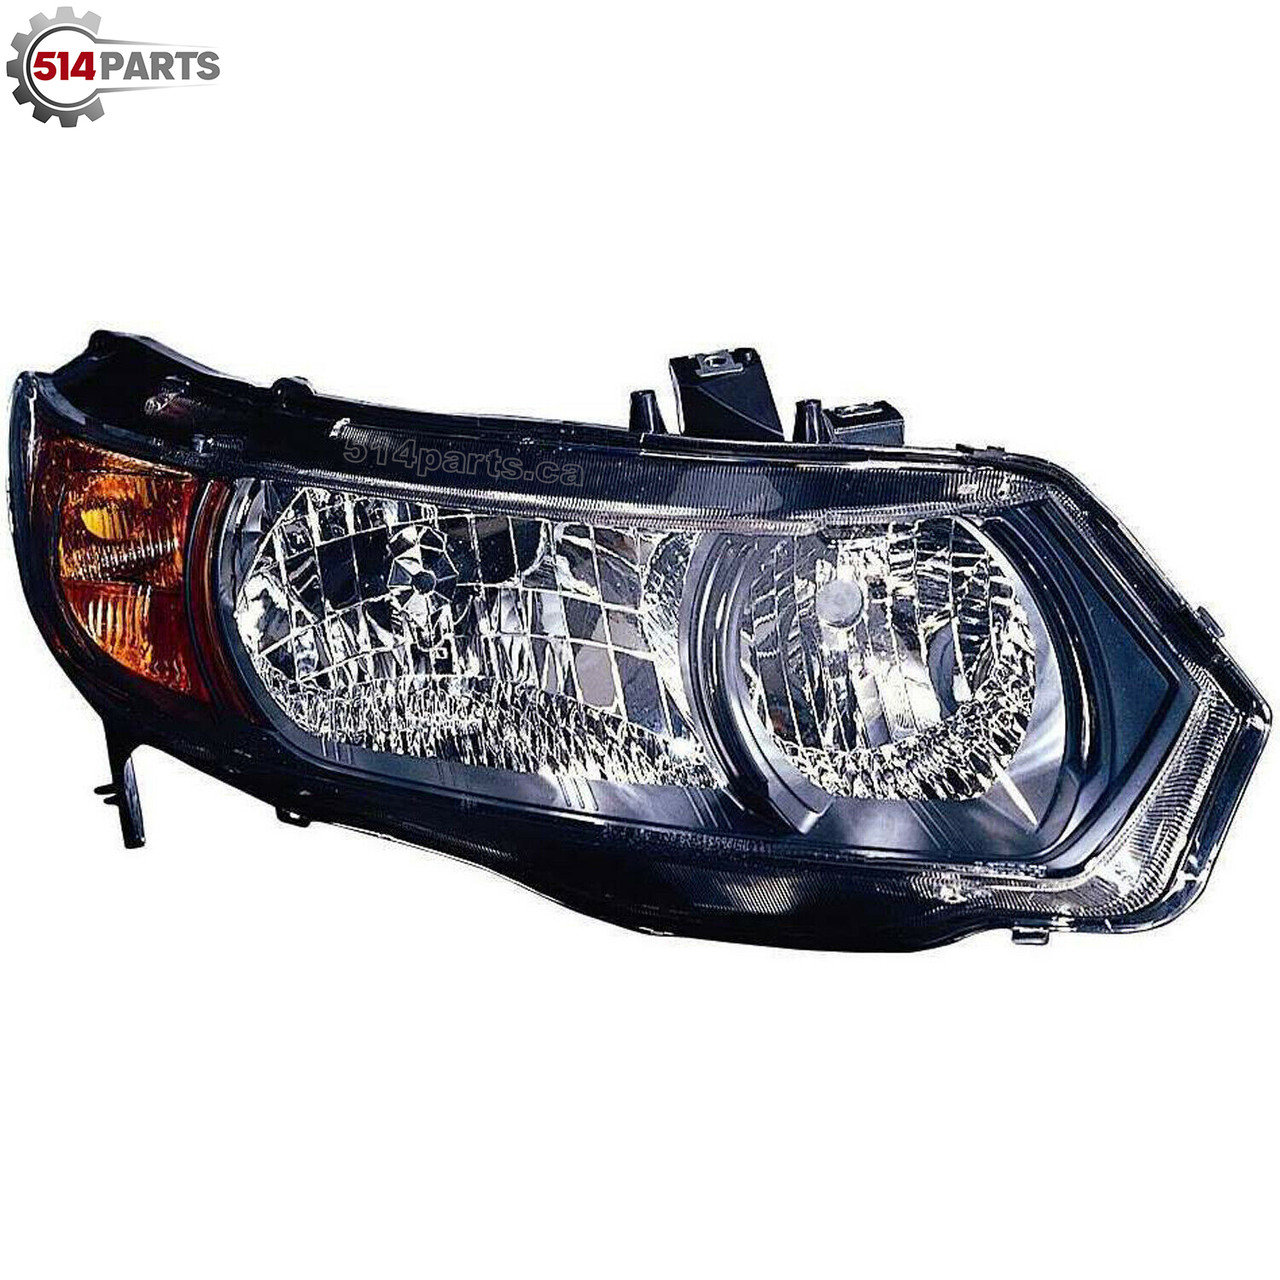 2006 - 2008 HONDA CIVIC COUPE 1.8L except 6 speed transmission HEADLIGHTS High Quality - PHARES AVANT Haute Qualite